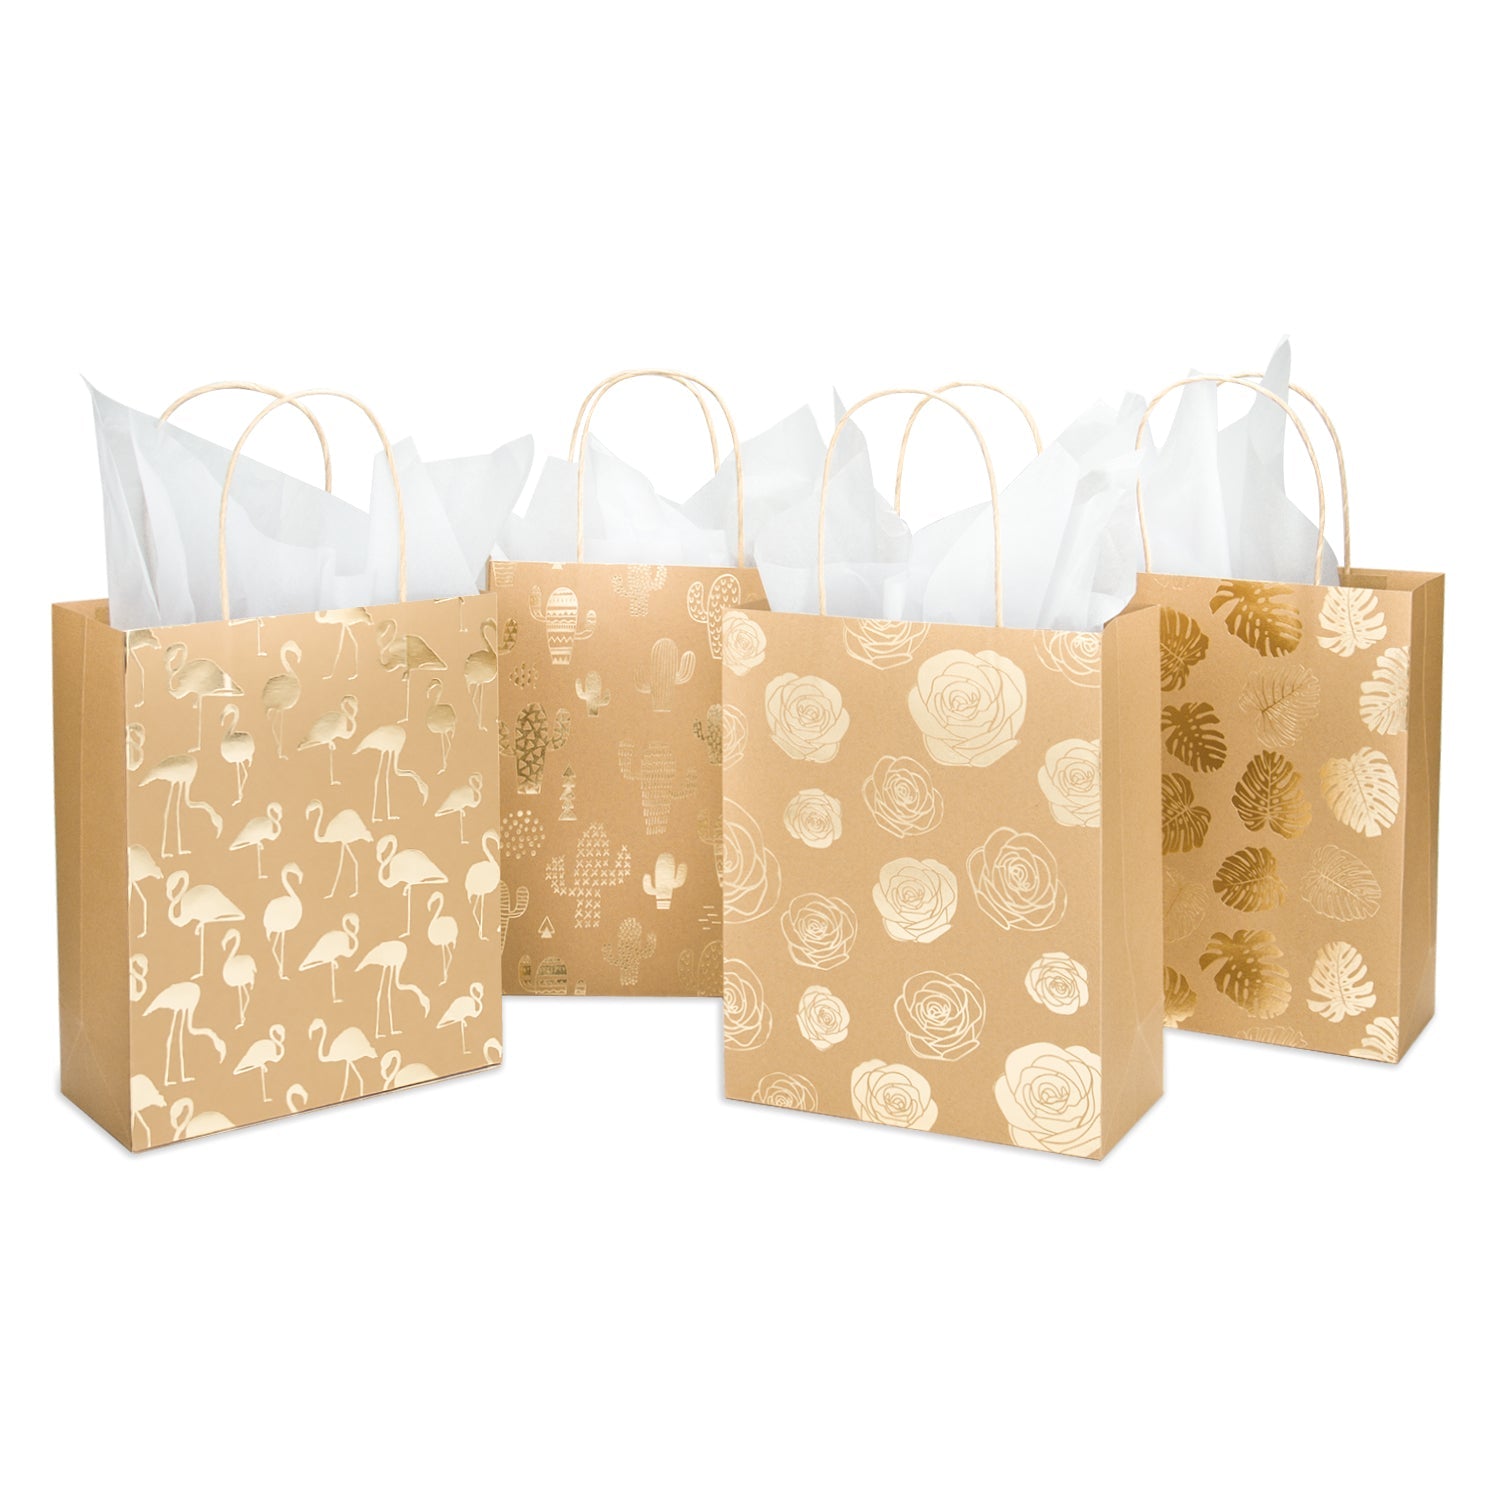 Wrapaholic Medium Size Foil Gold Kraft Gift Bags with Tissue Paper-4 Pack